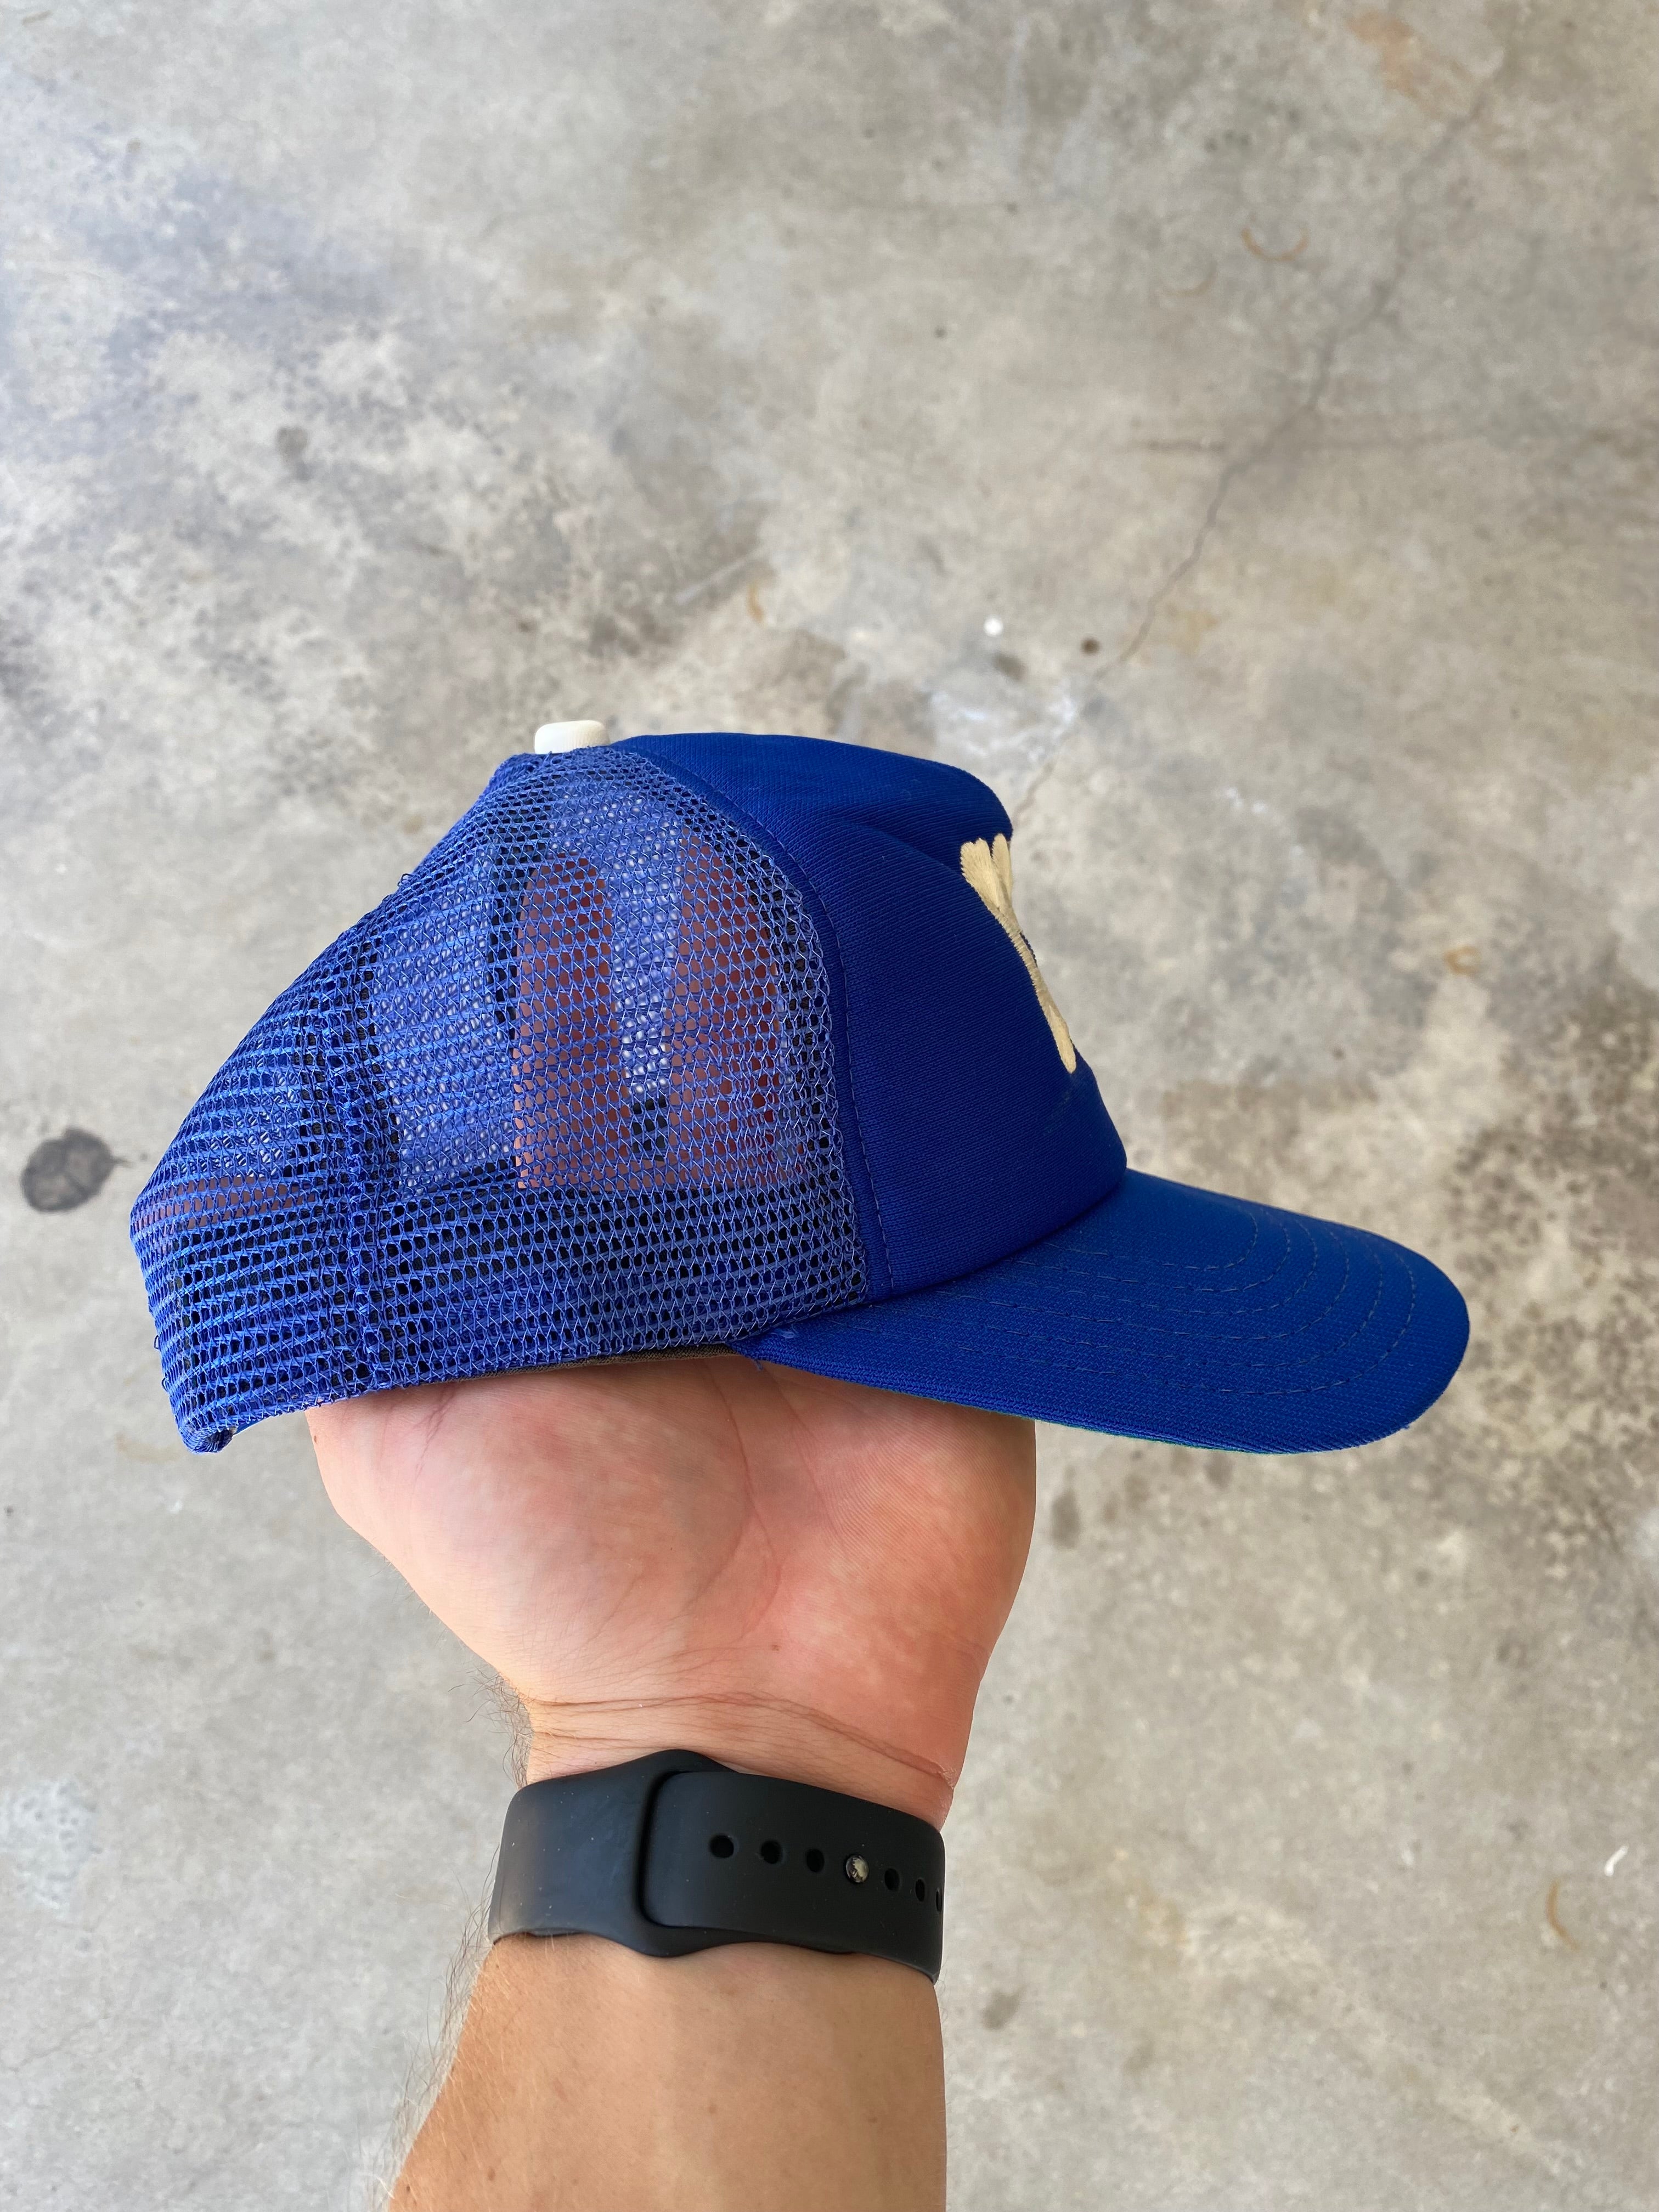 1980s Indianapolis Colts Trucker Hat